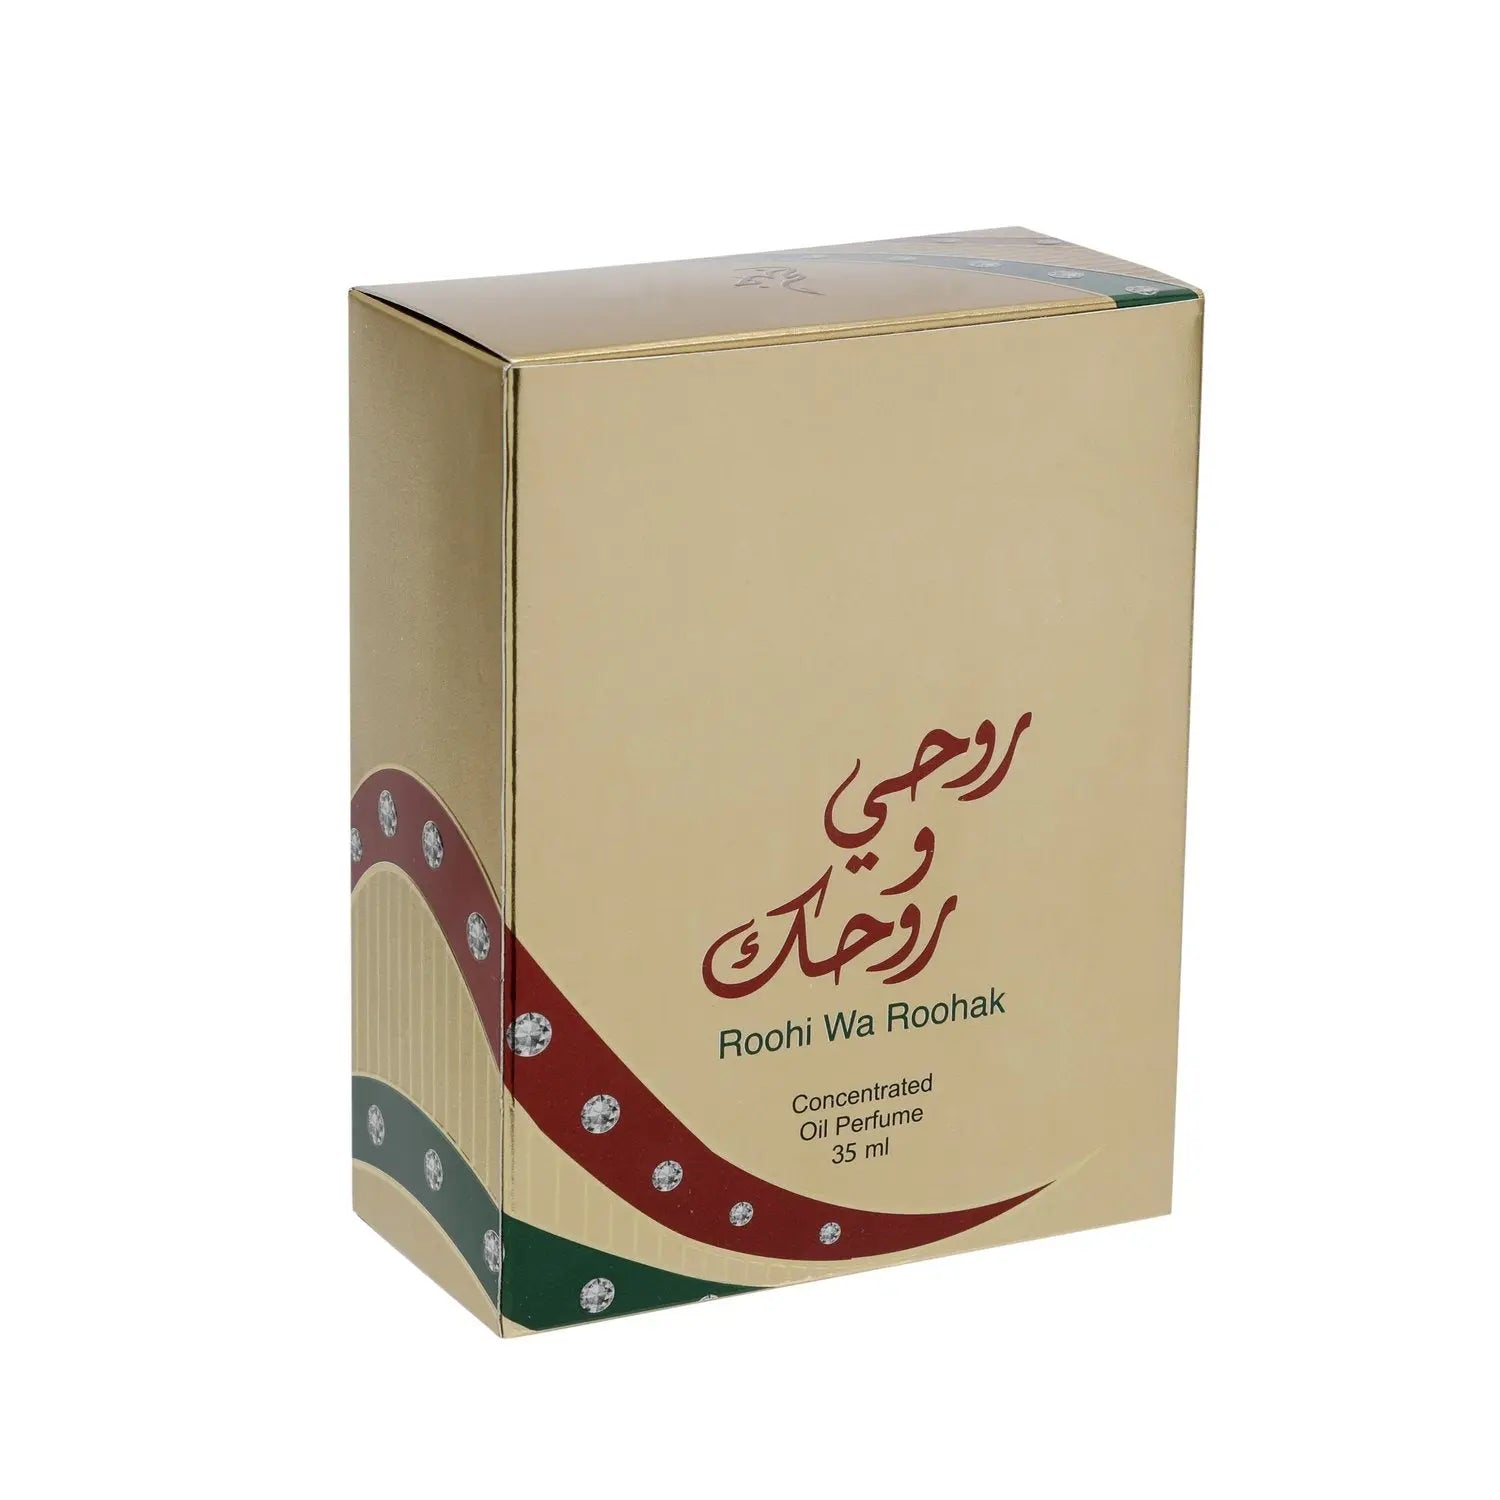 The image depicts a perfume box with the following features:  The box is primarily gold with a matte finish. The bottom portion curves into a wave-like design featuring maroon and green colors with embedded gem-like patterns. Arabic calligraphy in a flowing script is prominently displayed on the front of the box, reading "روحي و روحك" (Roohi Wa Roohak).